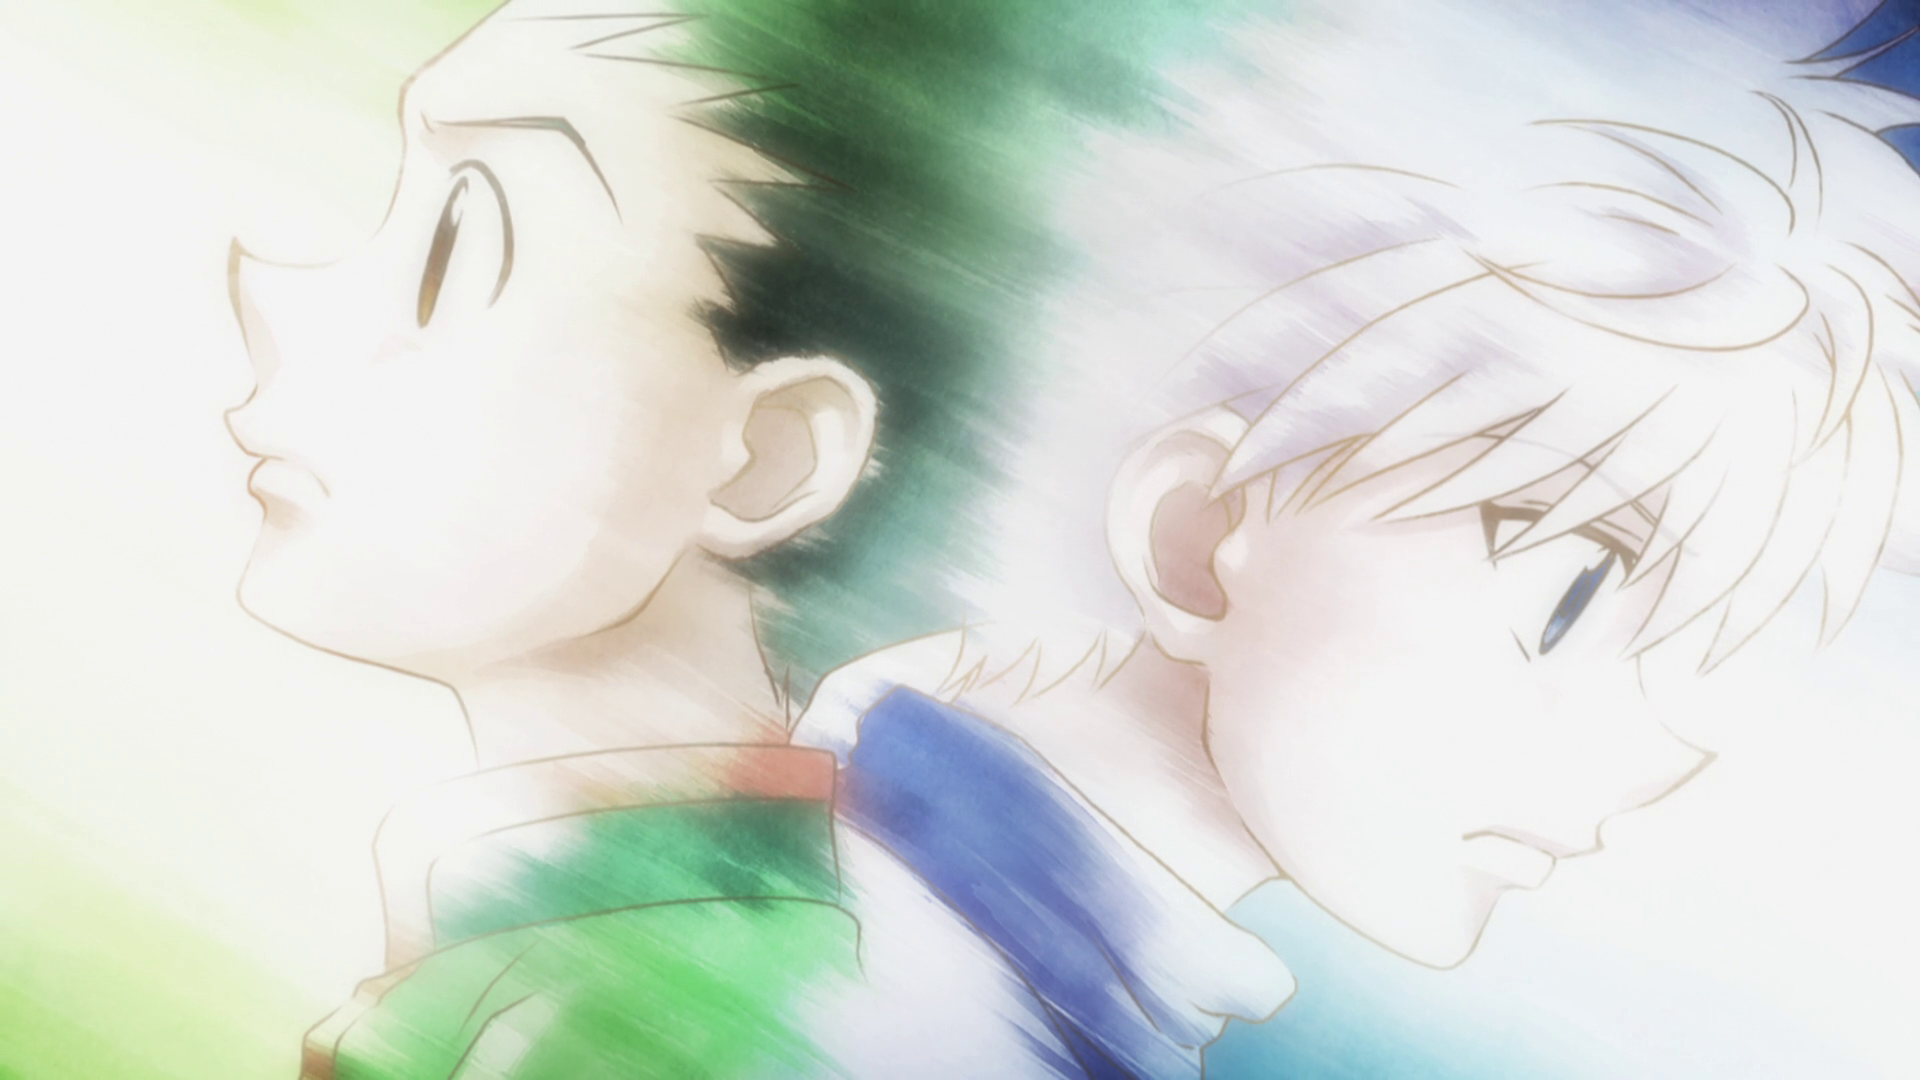 Hunter X Hunter: Does Gon ever get to meet his father? Here's what